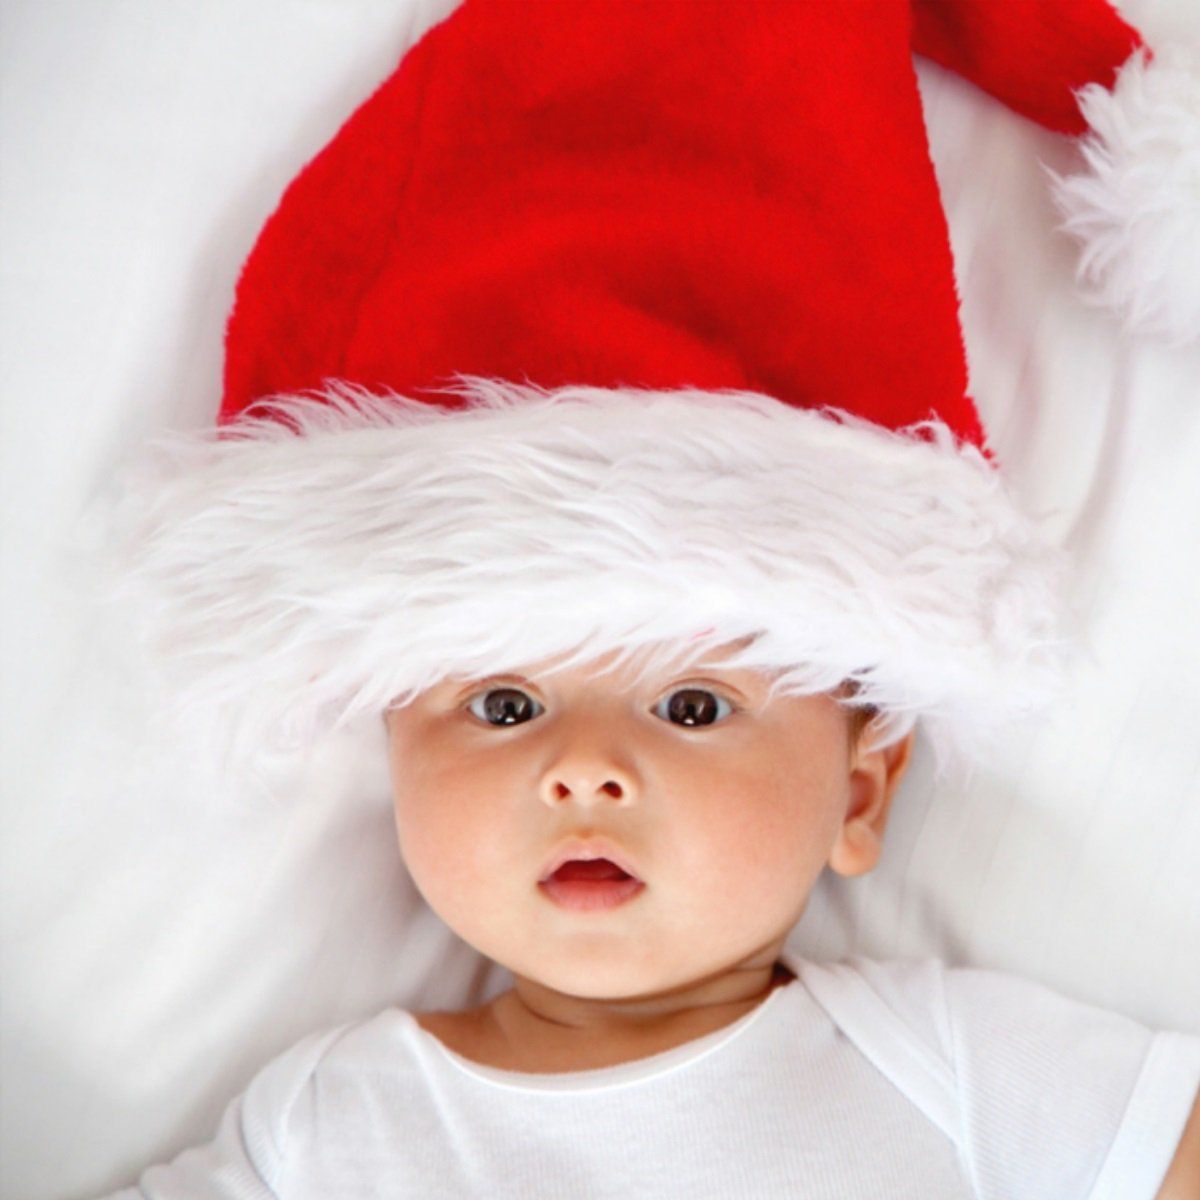 Stuck or Clueless? Here are 5 Fun Baby Presents for Christmas 2018